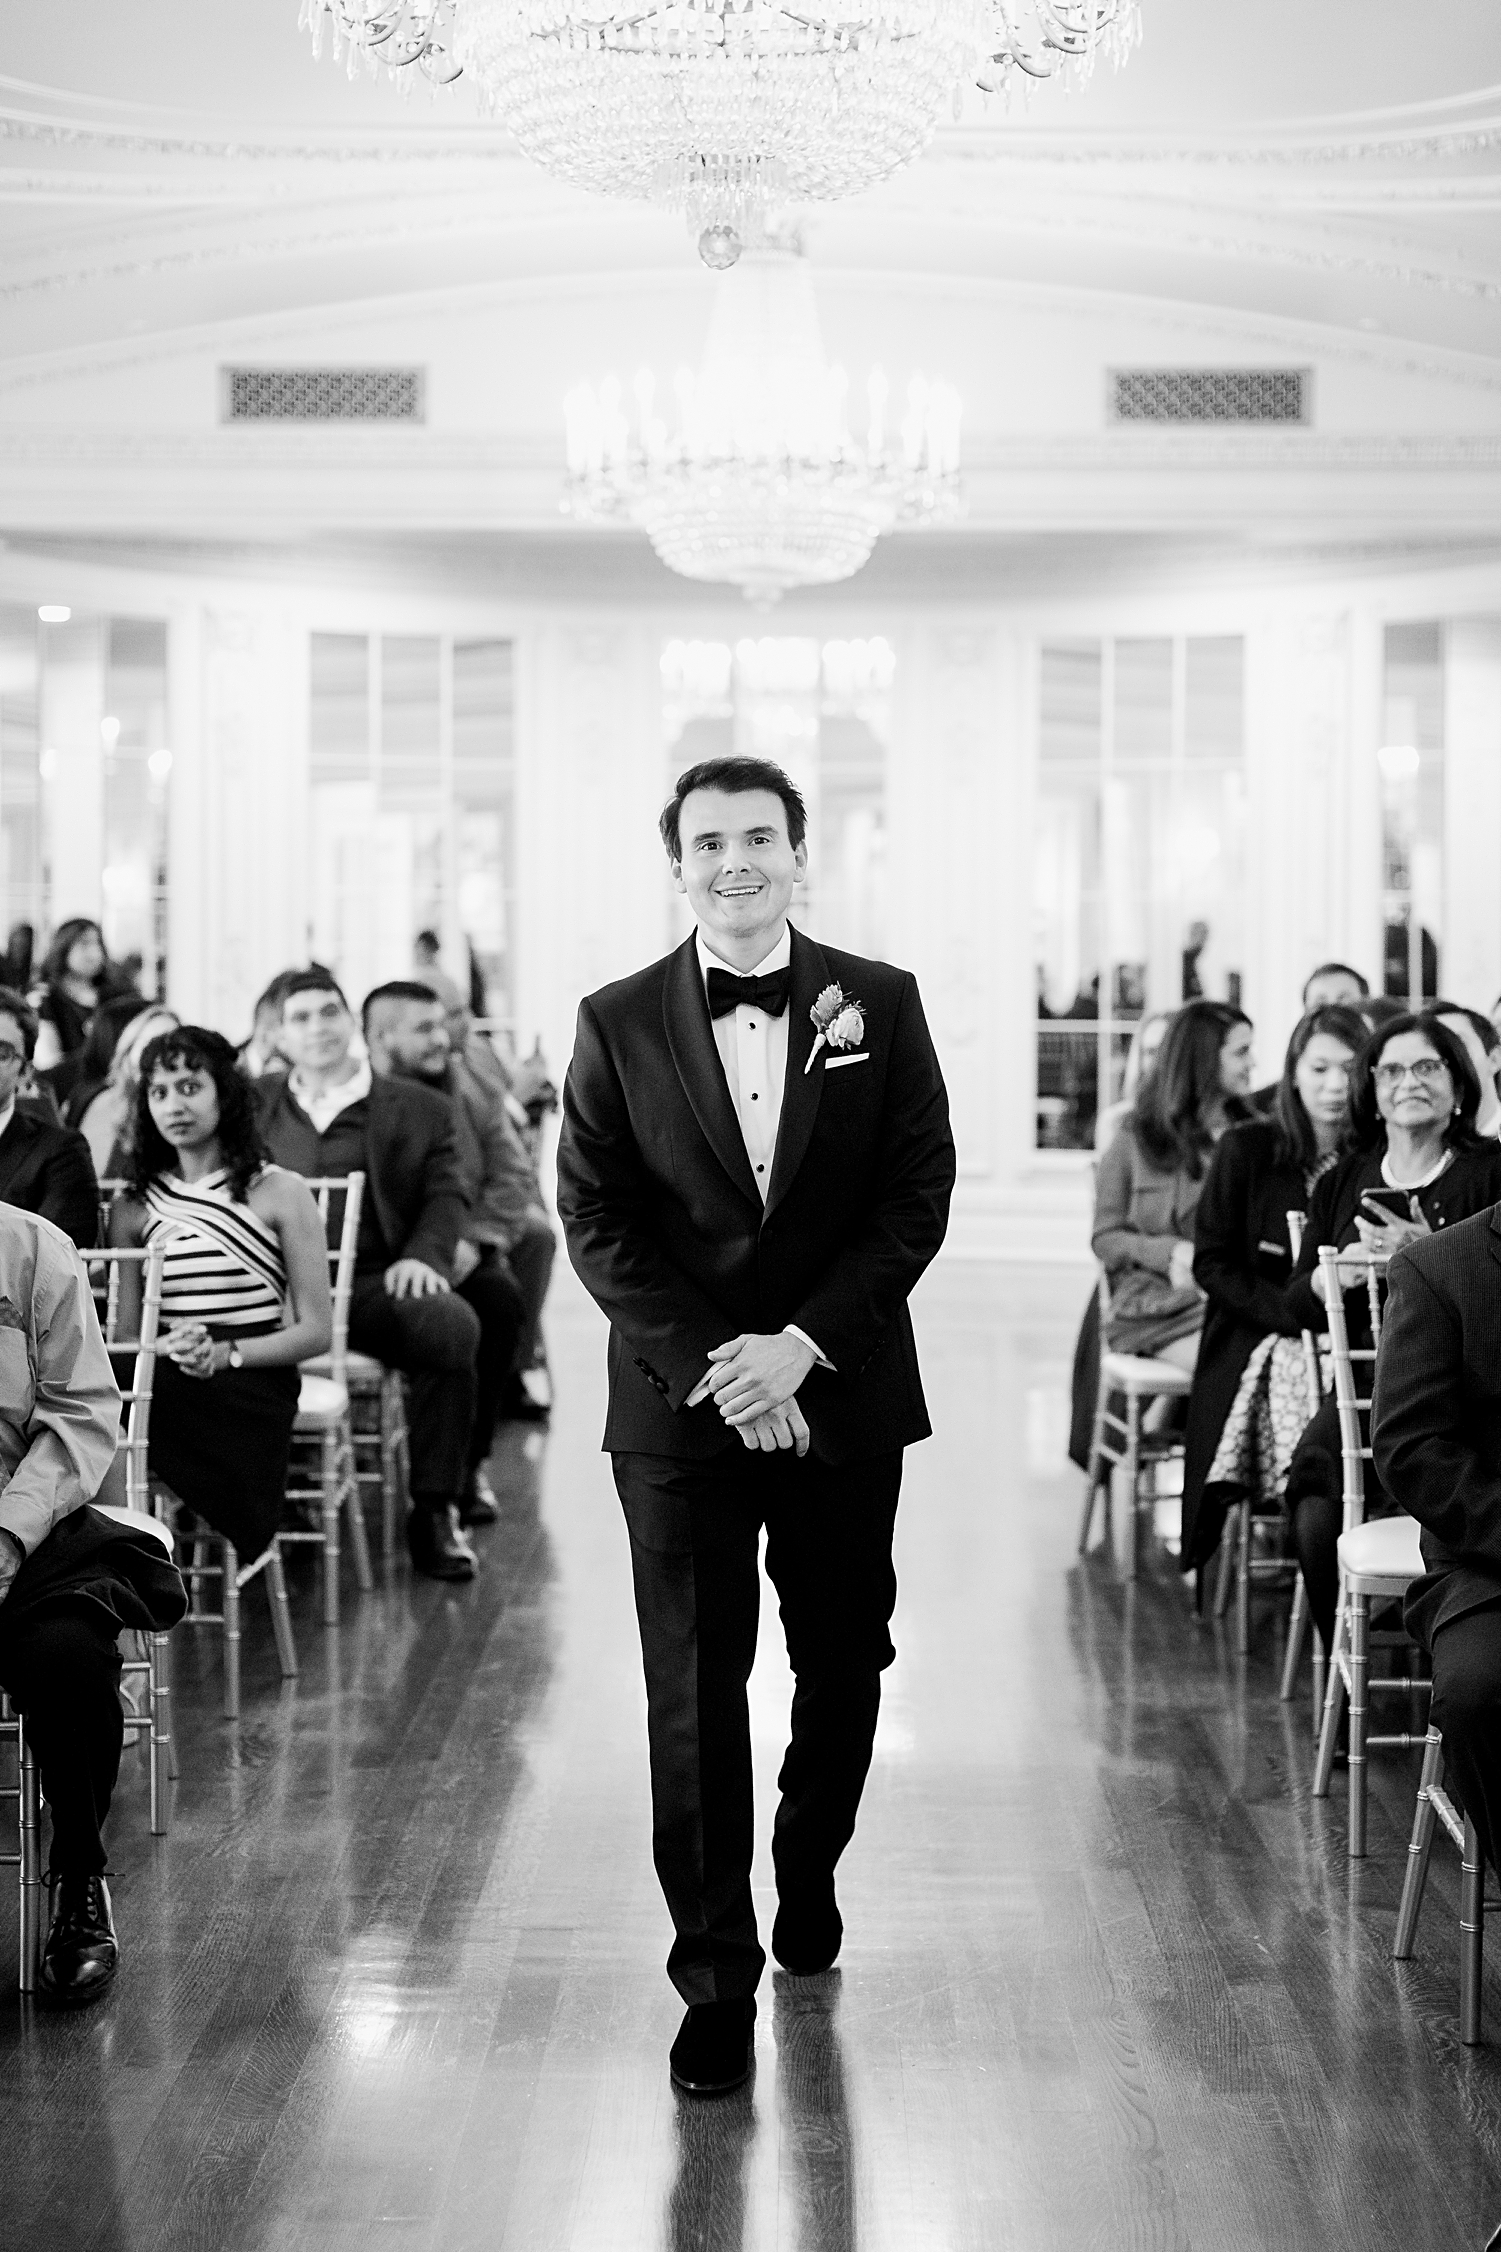 Indoor wedding ceremony groom walking down aisle smiling black and white